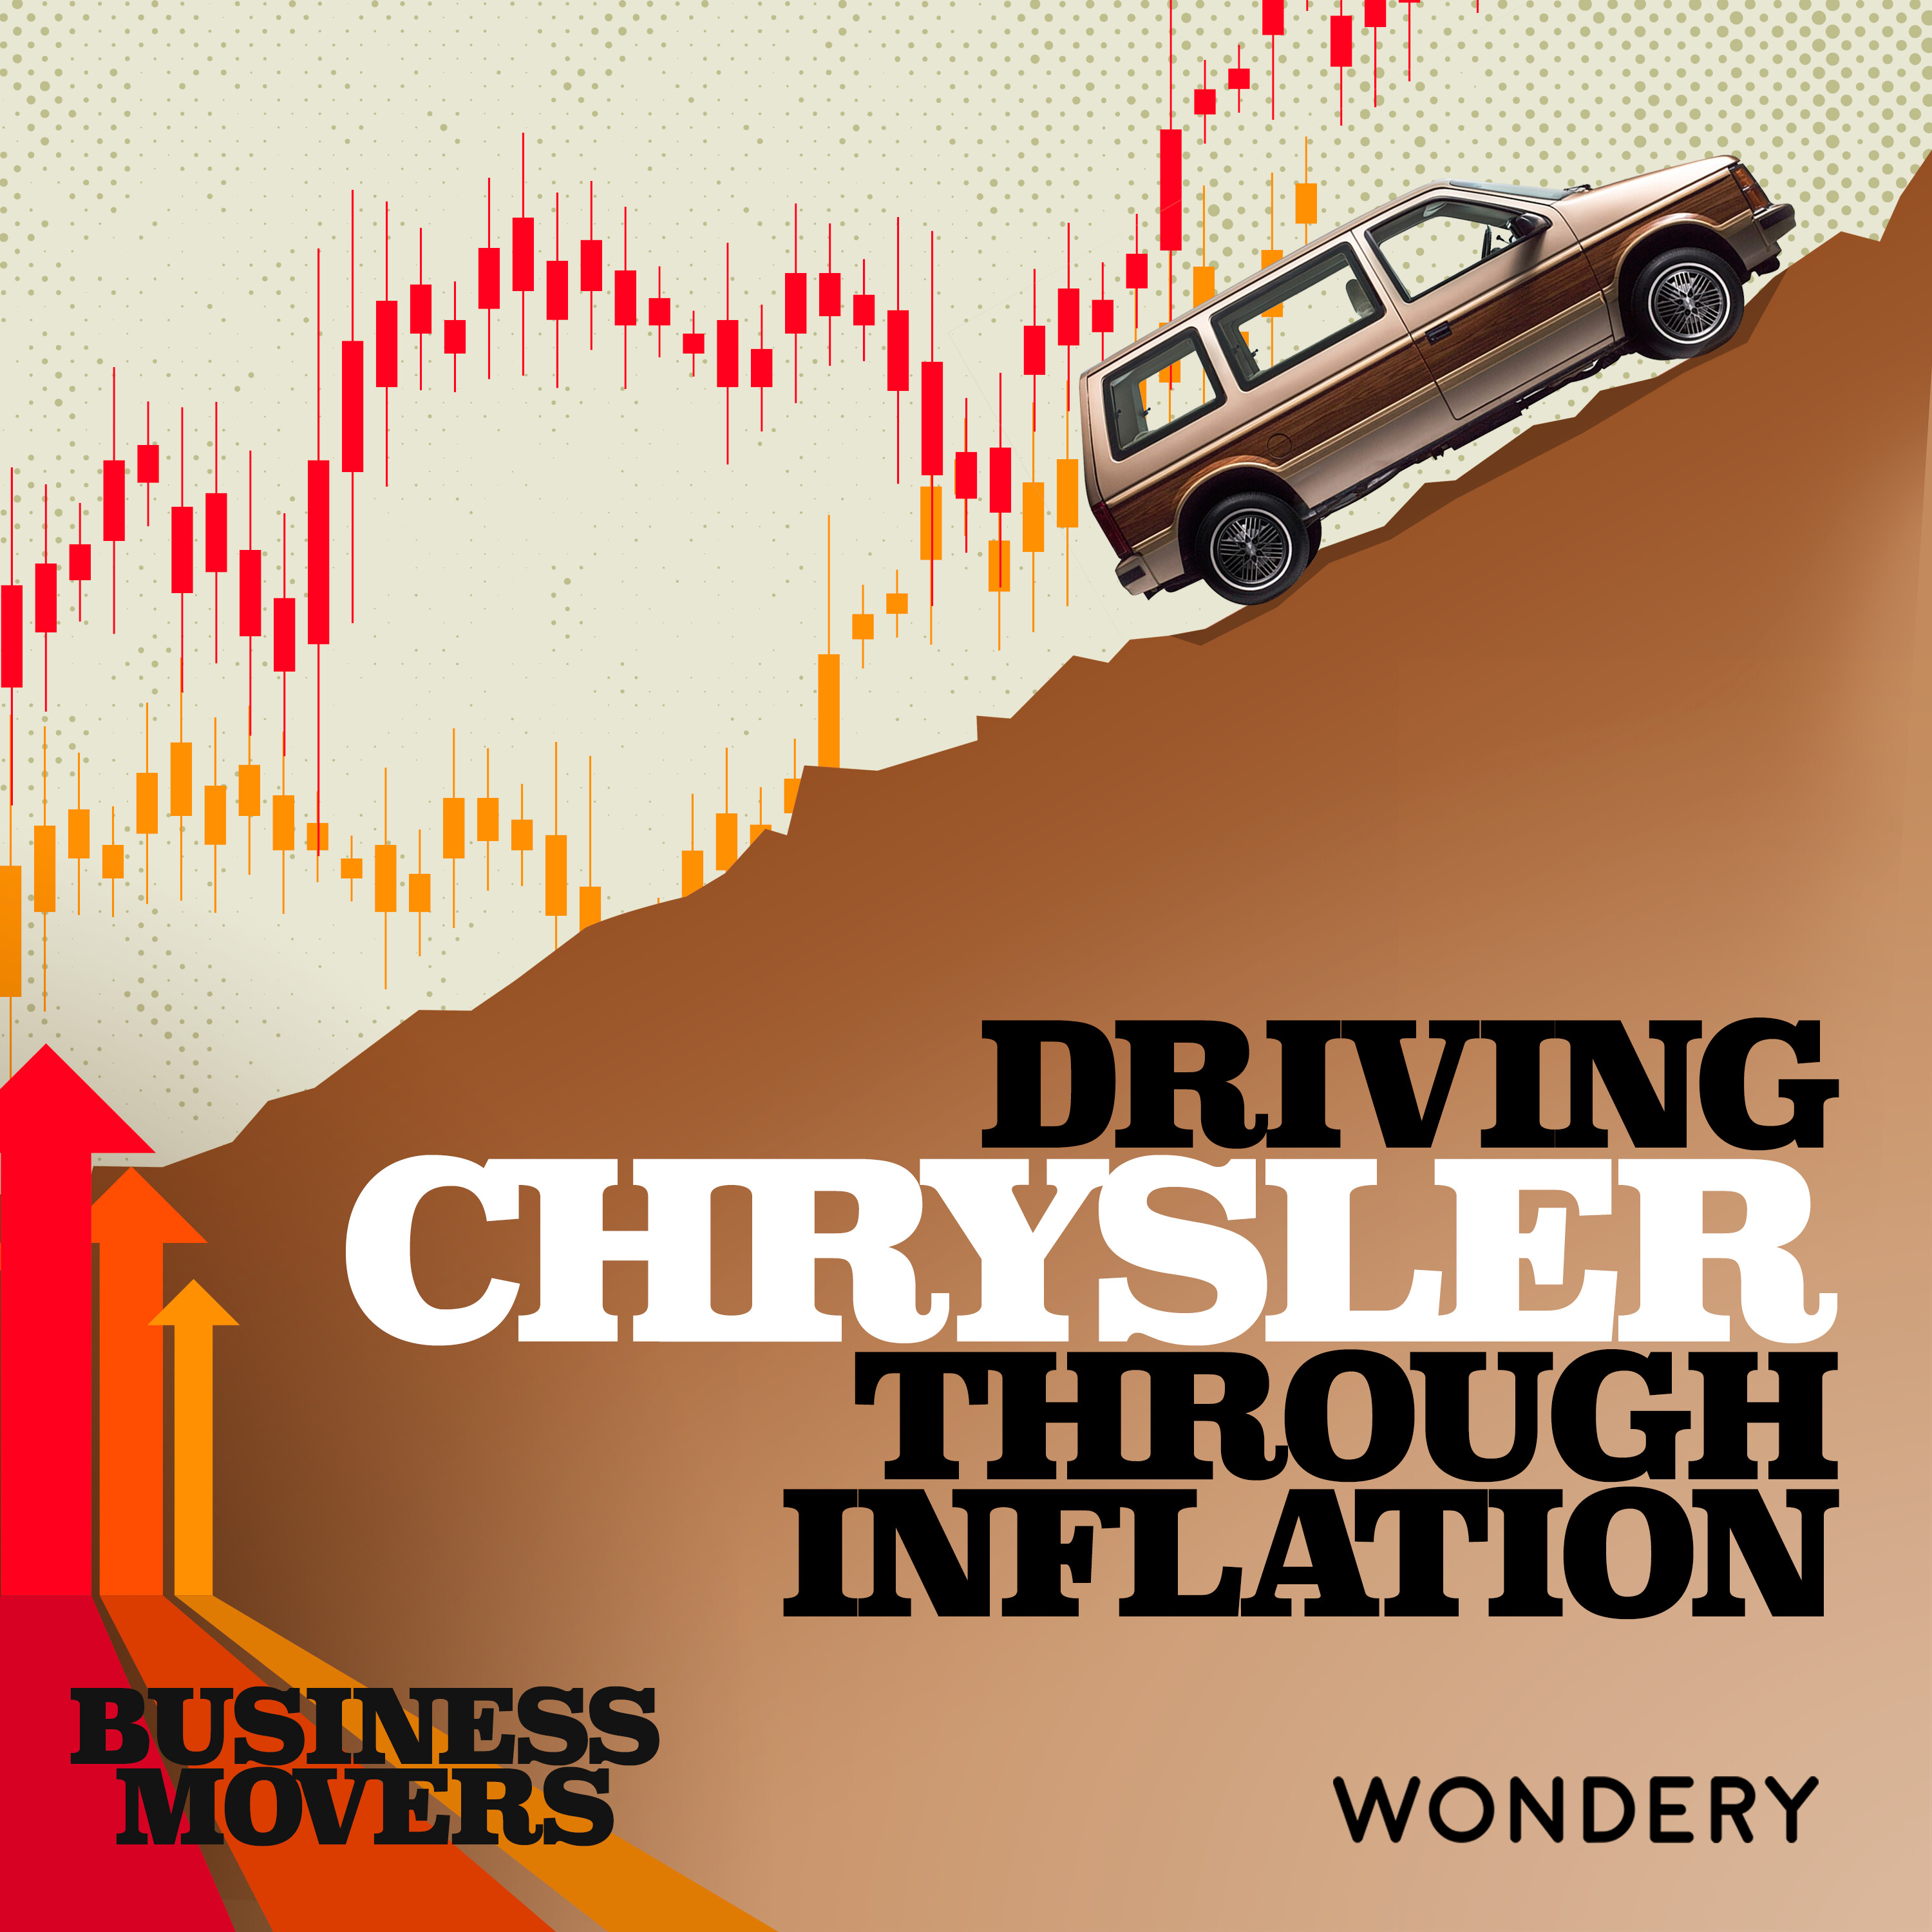 Driving Chrysler Through Inflation | Author David Bahnsen Takes on Mis-Inflation | 5